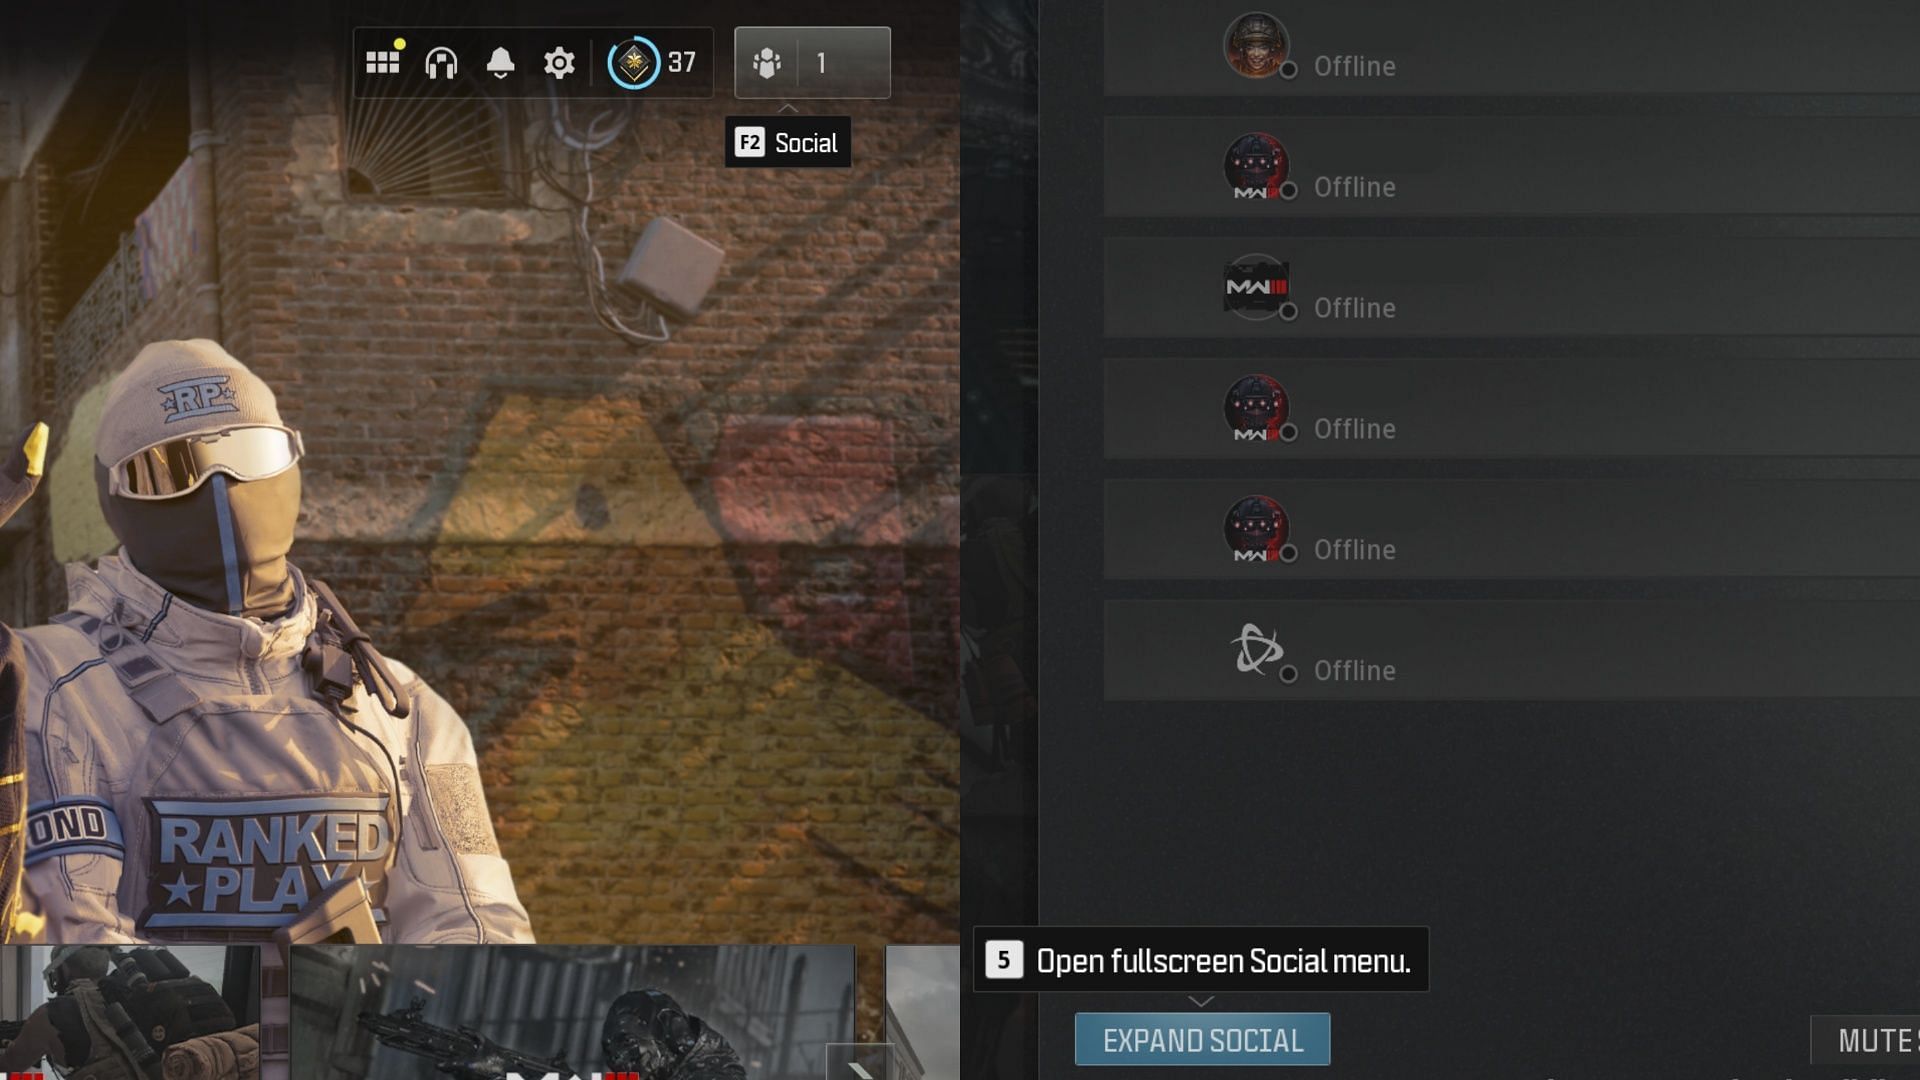 How to expand the Social option (Image via Activision)